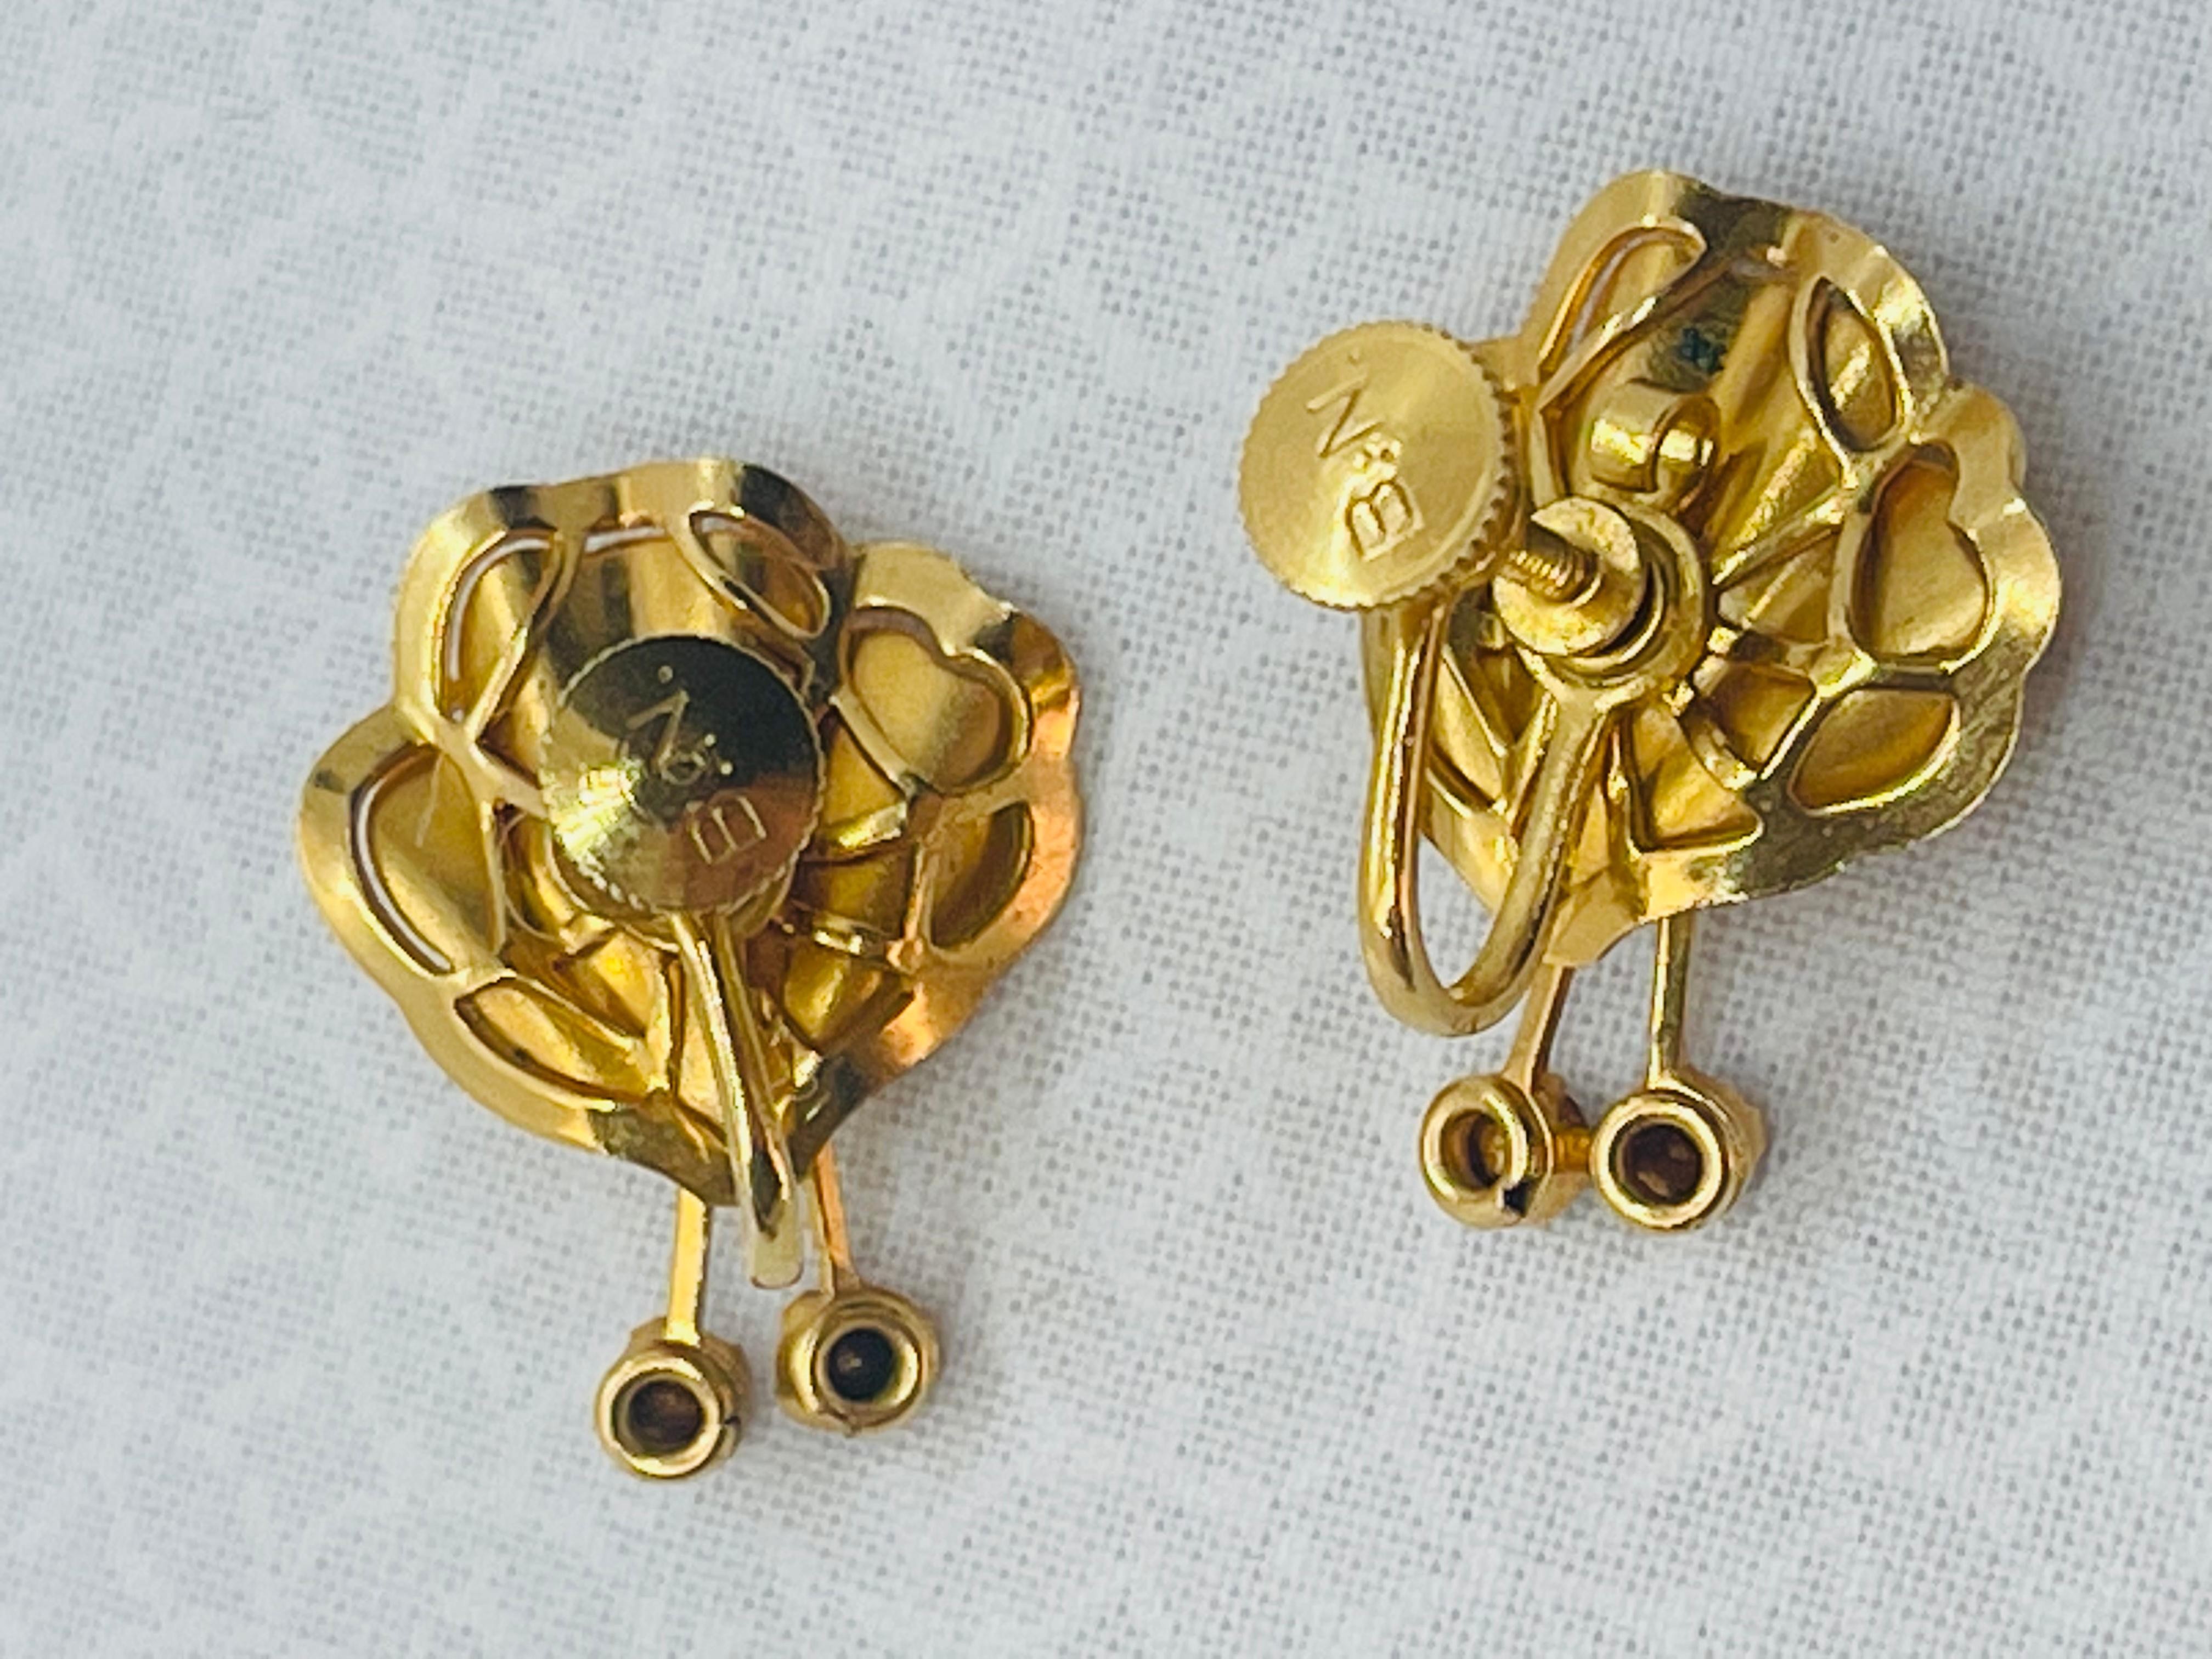 Bugbee & Niles Matching Earrings and Brooch Set Circa. 1955s - 1959 For Sale 3